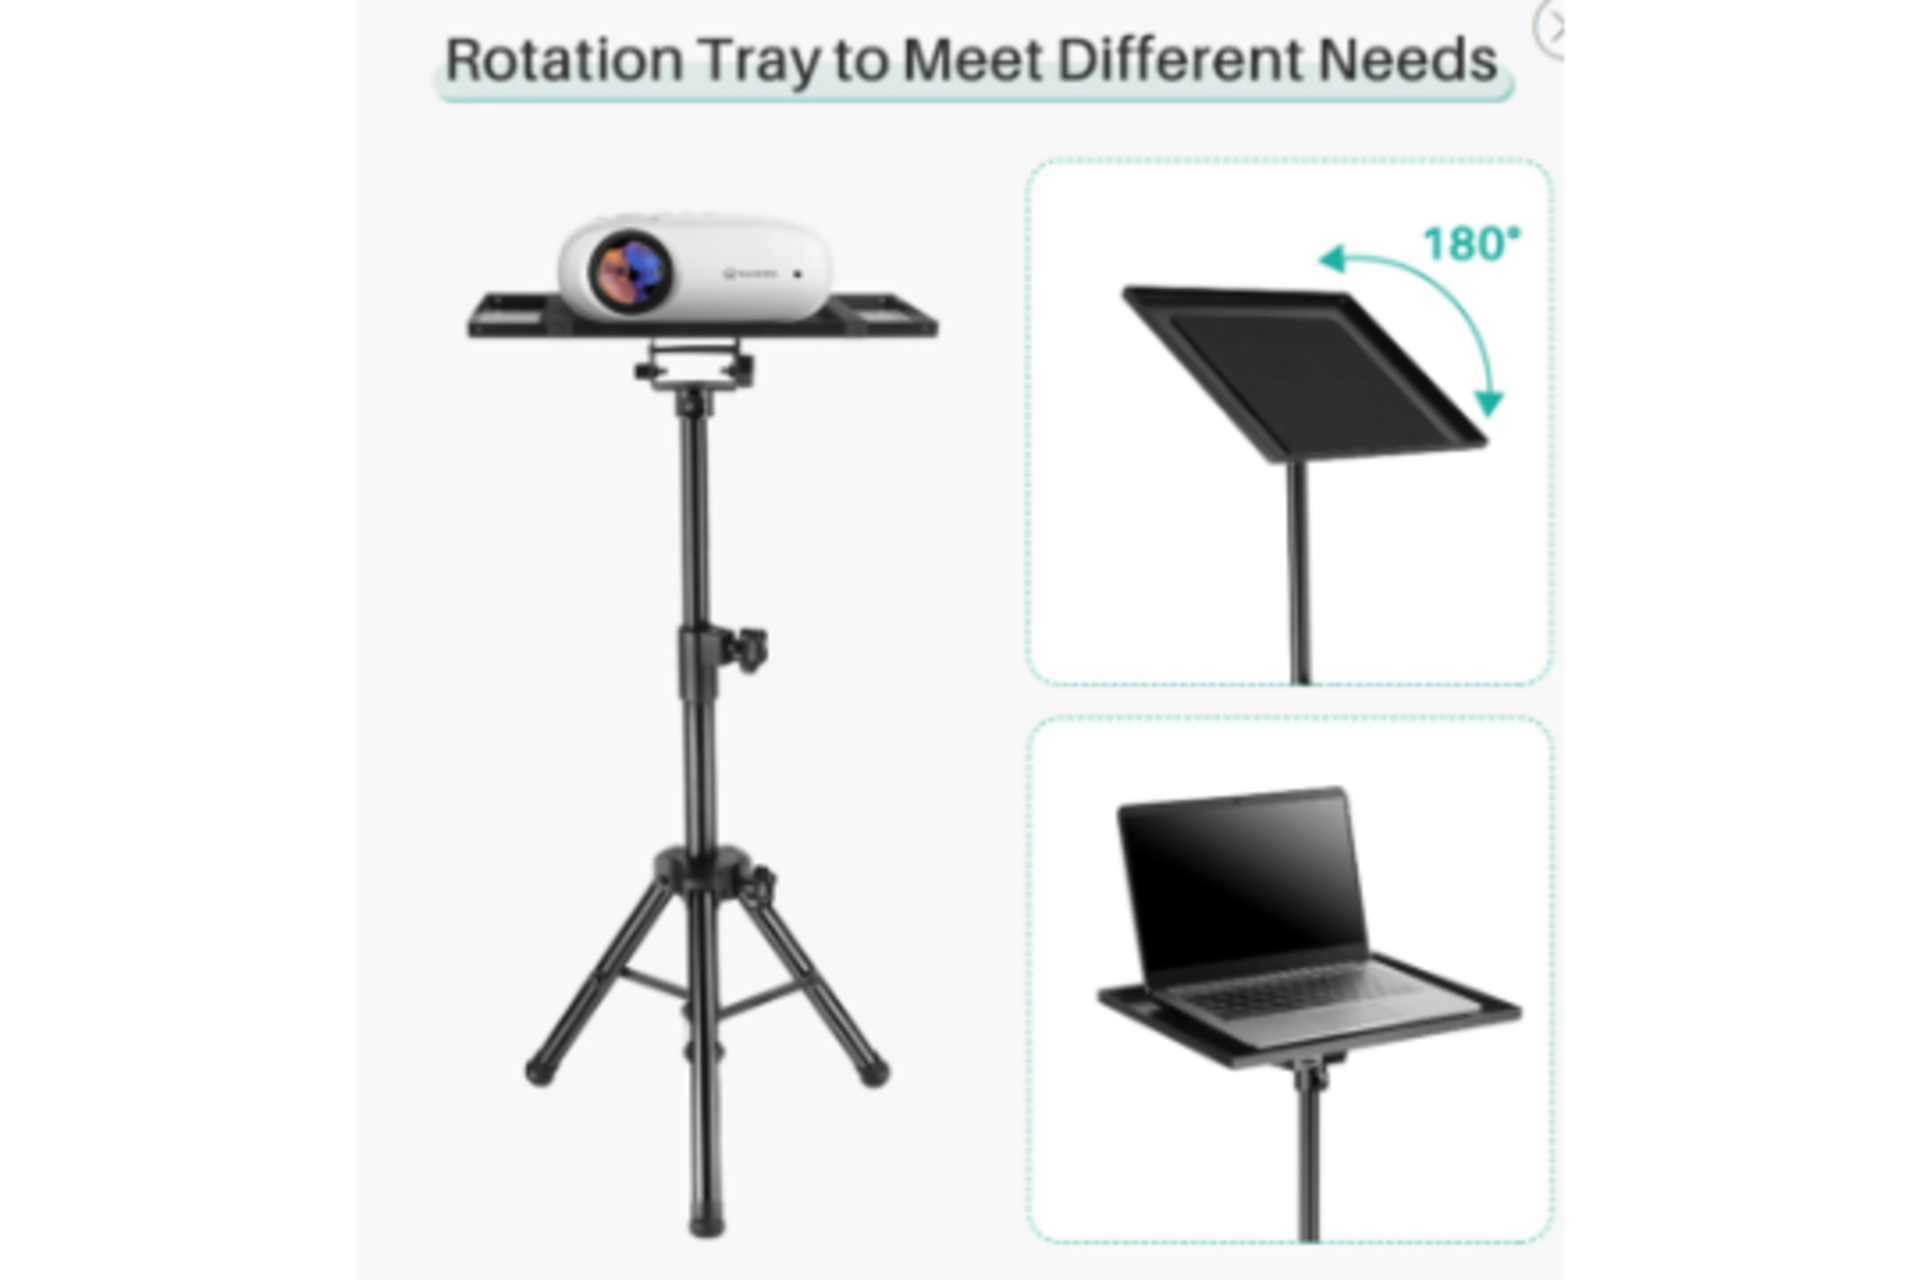 New Boxed VANKYO PT30 Projector Stand. VANKYO Universal Laptop Projector Stand with 15'' x 11'' - Image 2 of 3